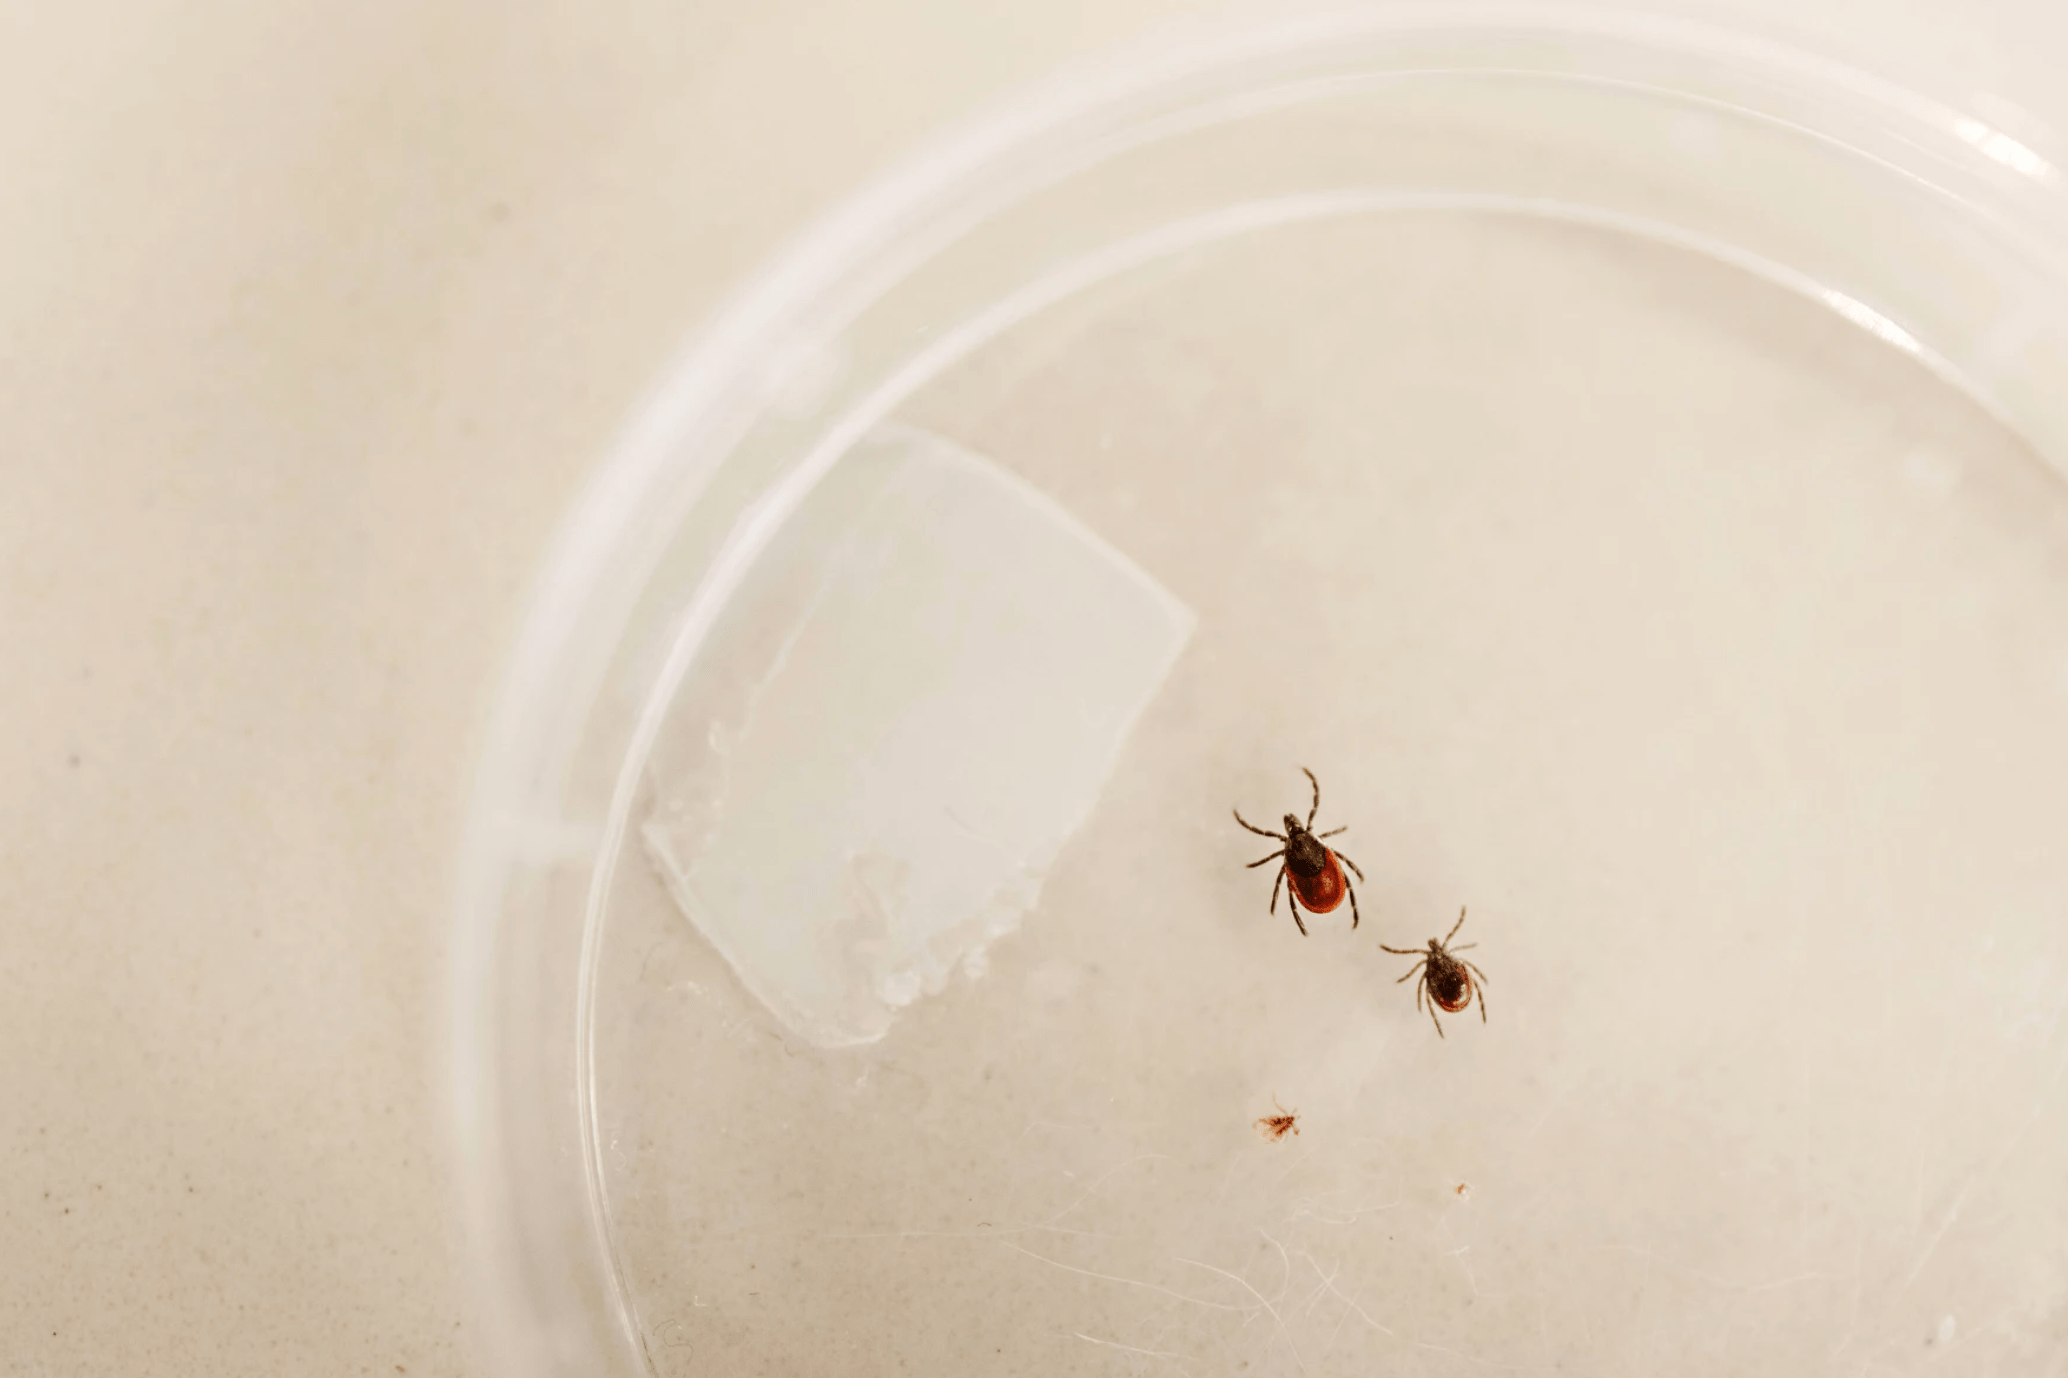 At the Connecticut Agricultural Experiment Station in New Haven, Dr. Goudarz Molaei and his team study and research ticks brought in from the public. In his lab are a female adult deer tick (left) and a dog tick on Feb. 8. (Tony Spinelli/Connecticut Public)